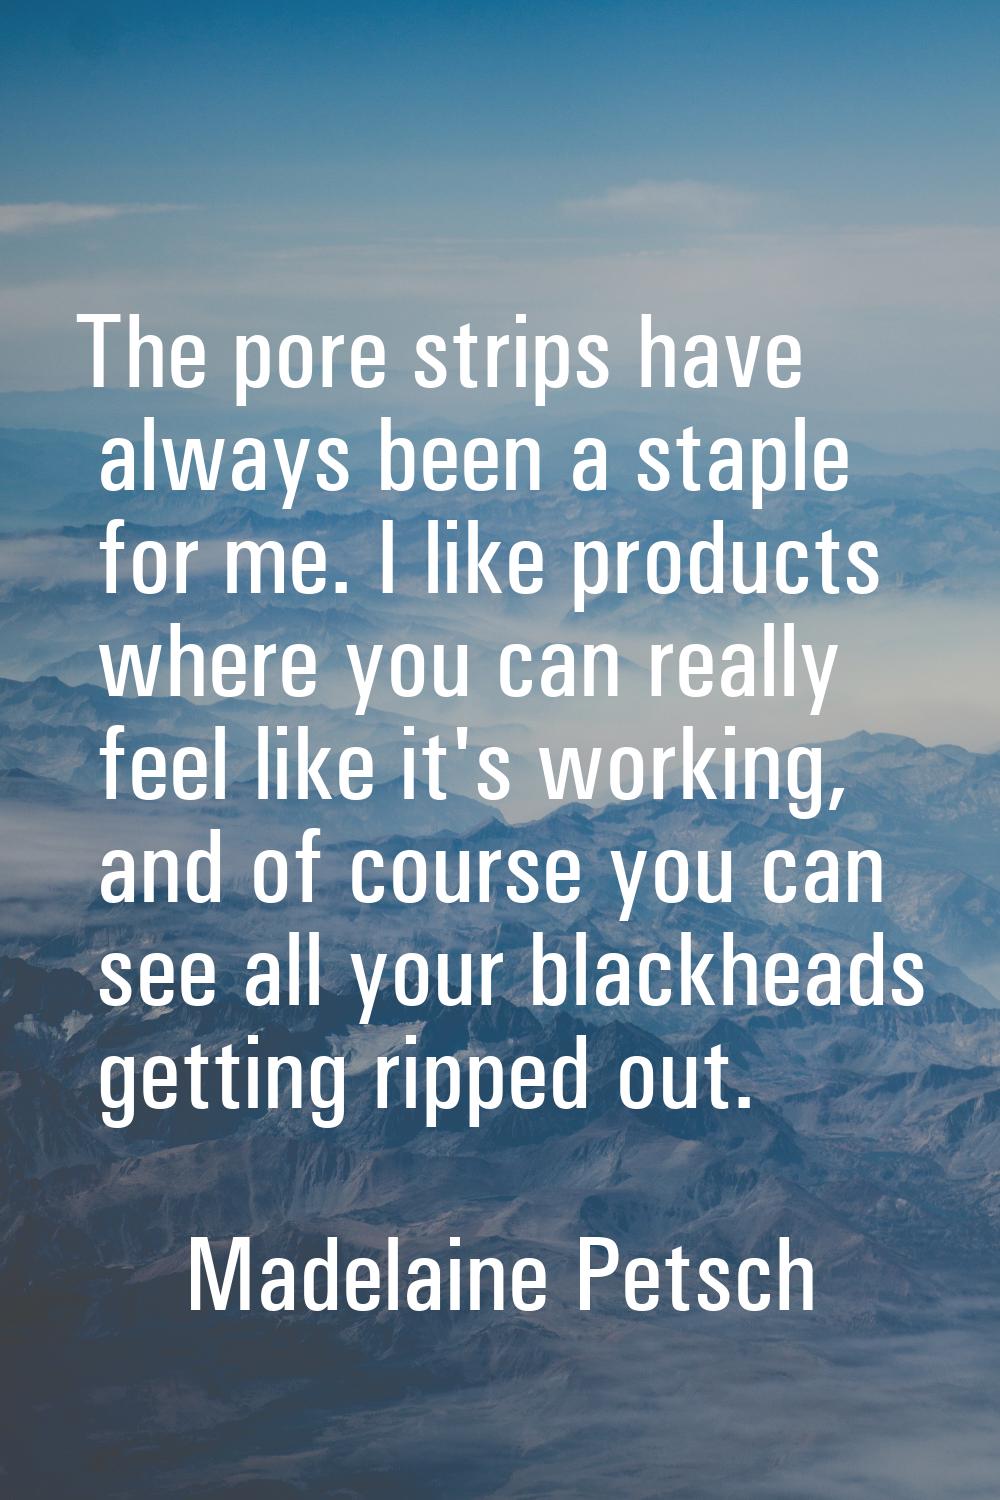 The pore strips have always been a staple for me. I like products where you can really feel like it